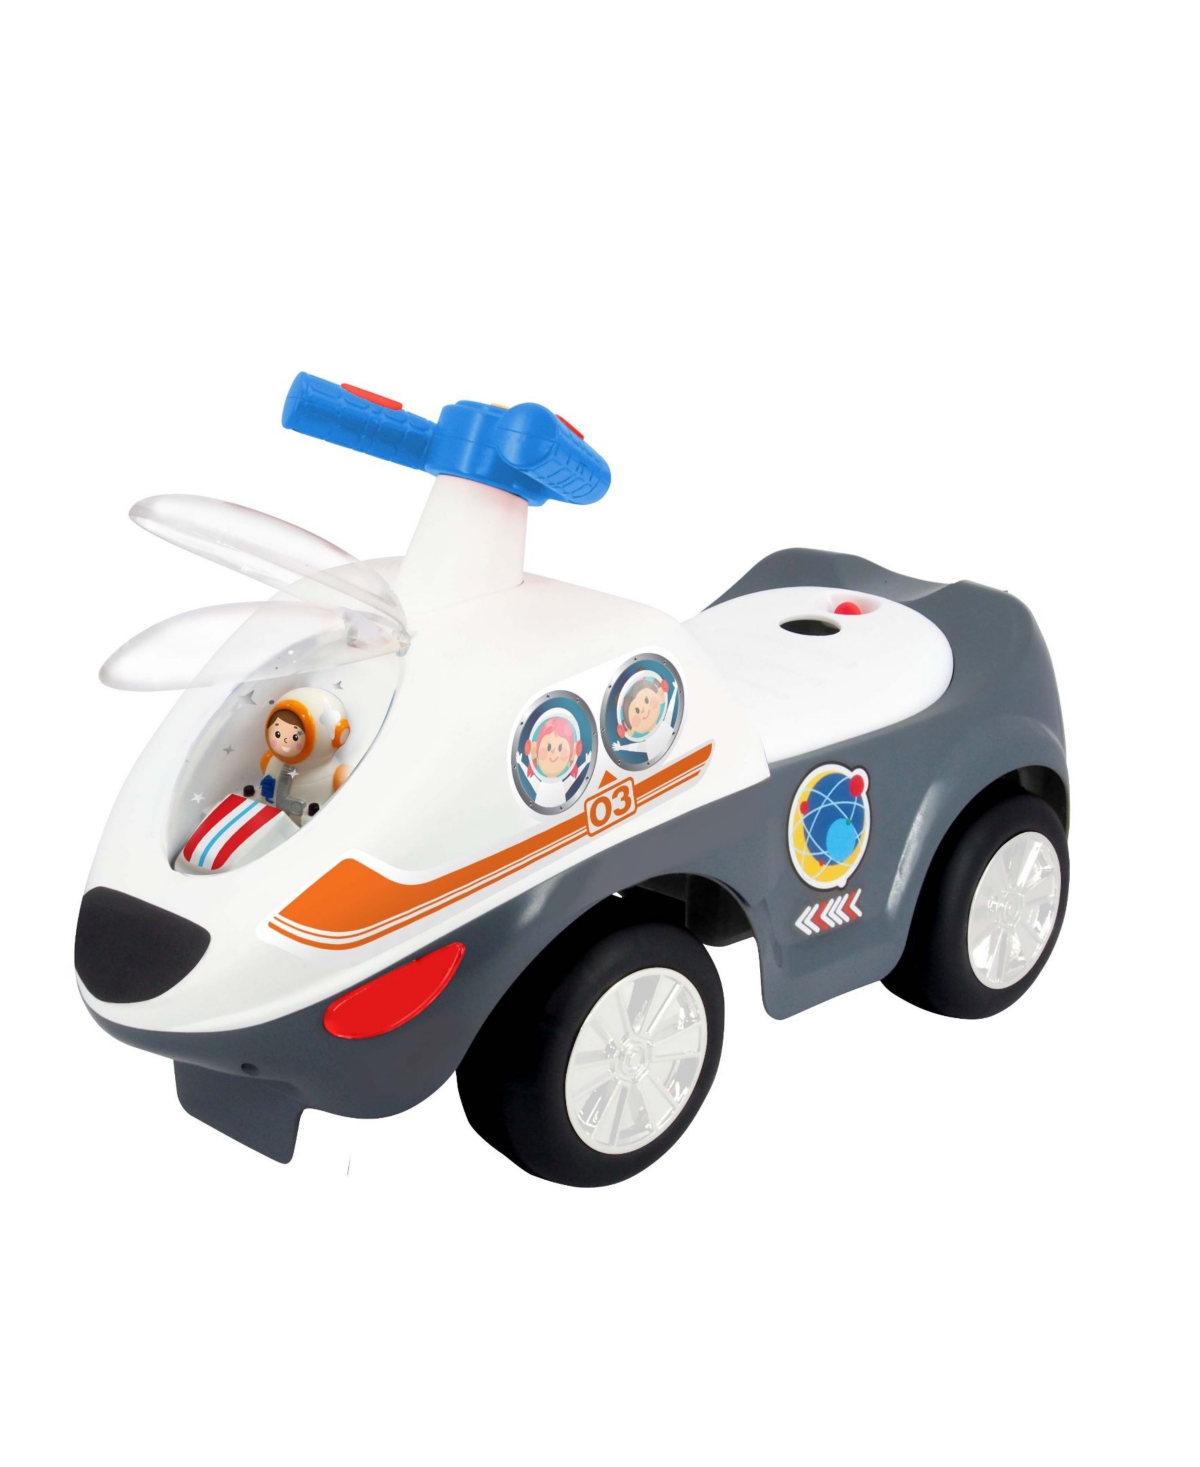 Kiddieland Kids' Lights And Sounds Space Blaster Ride-on In Multi